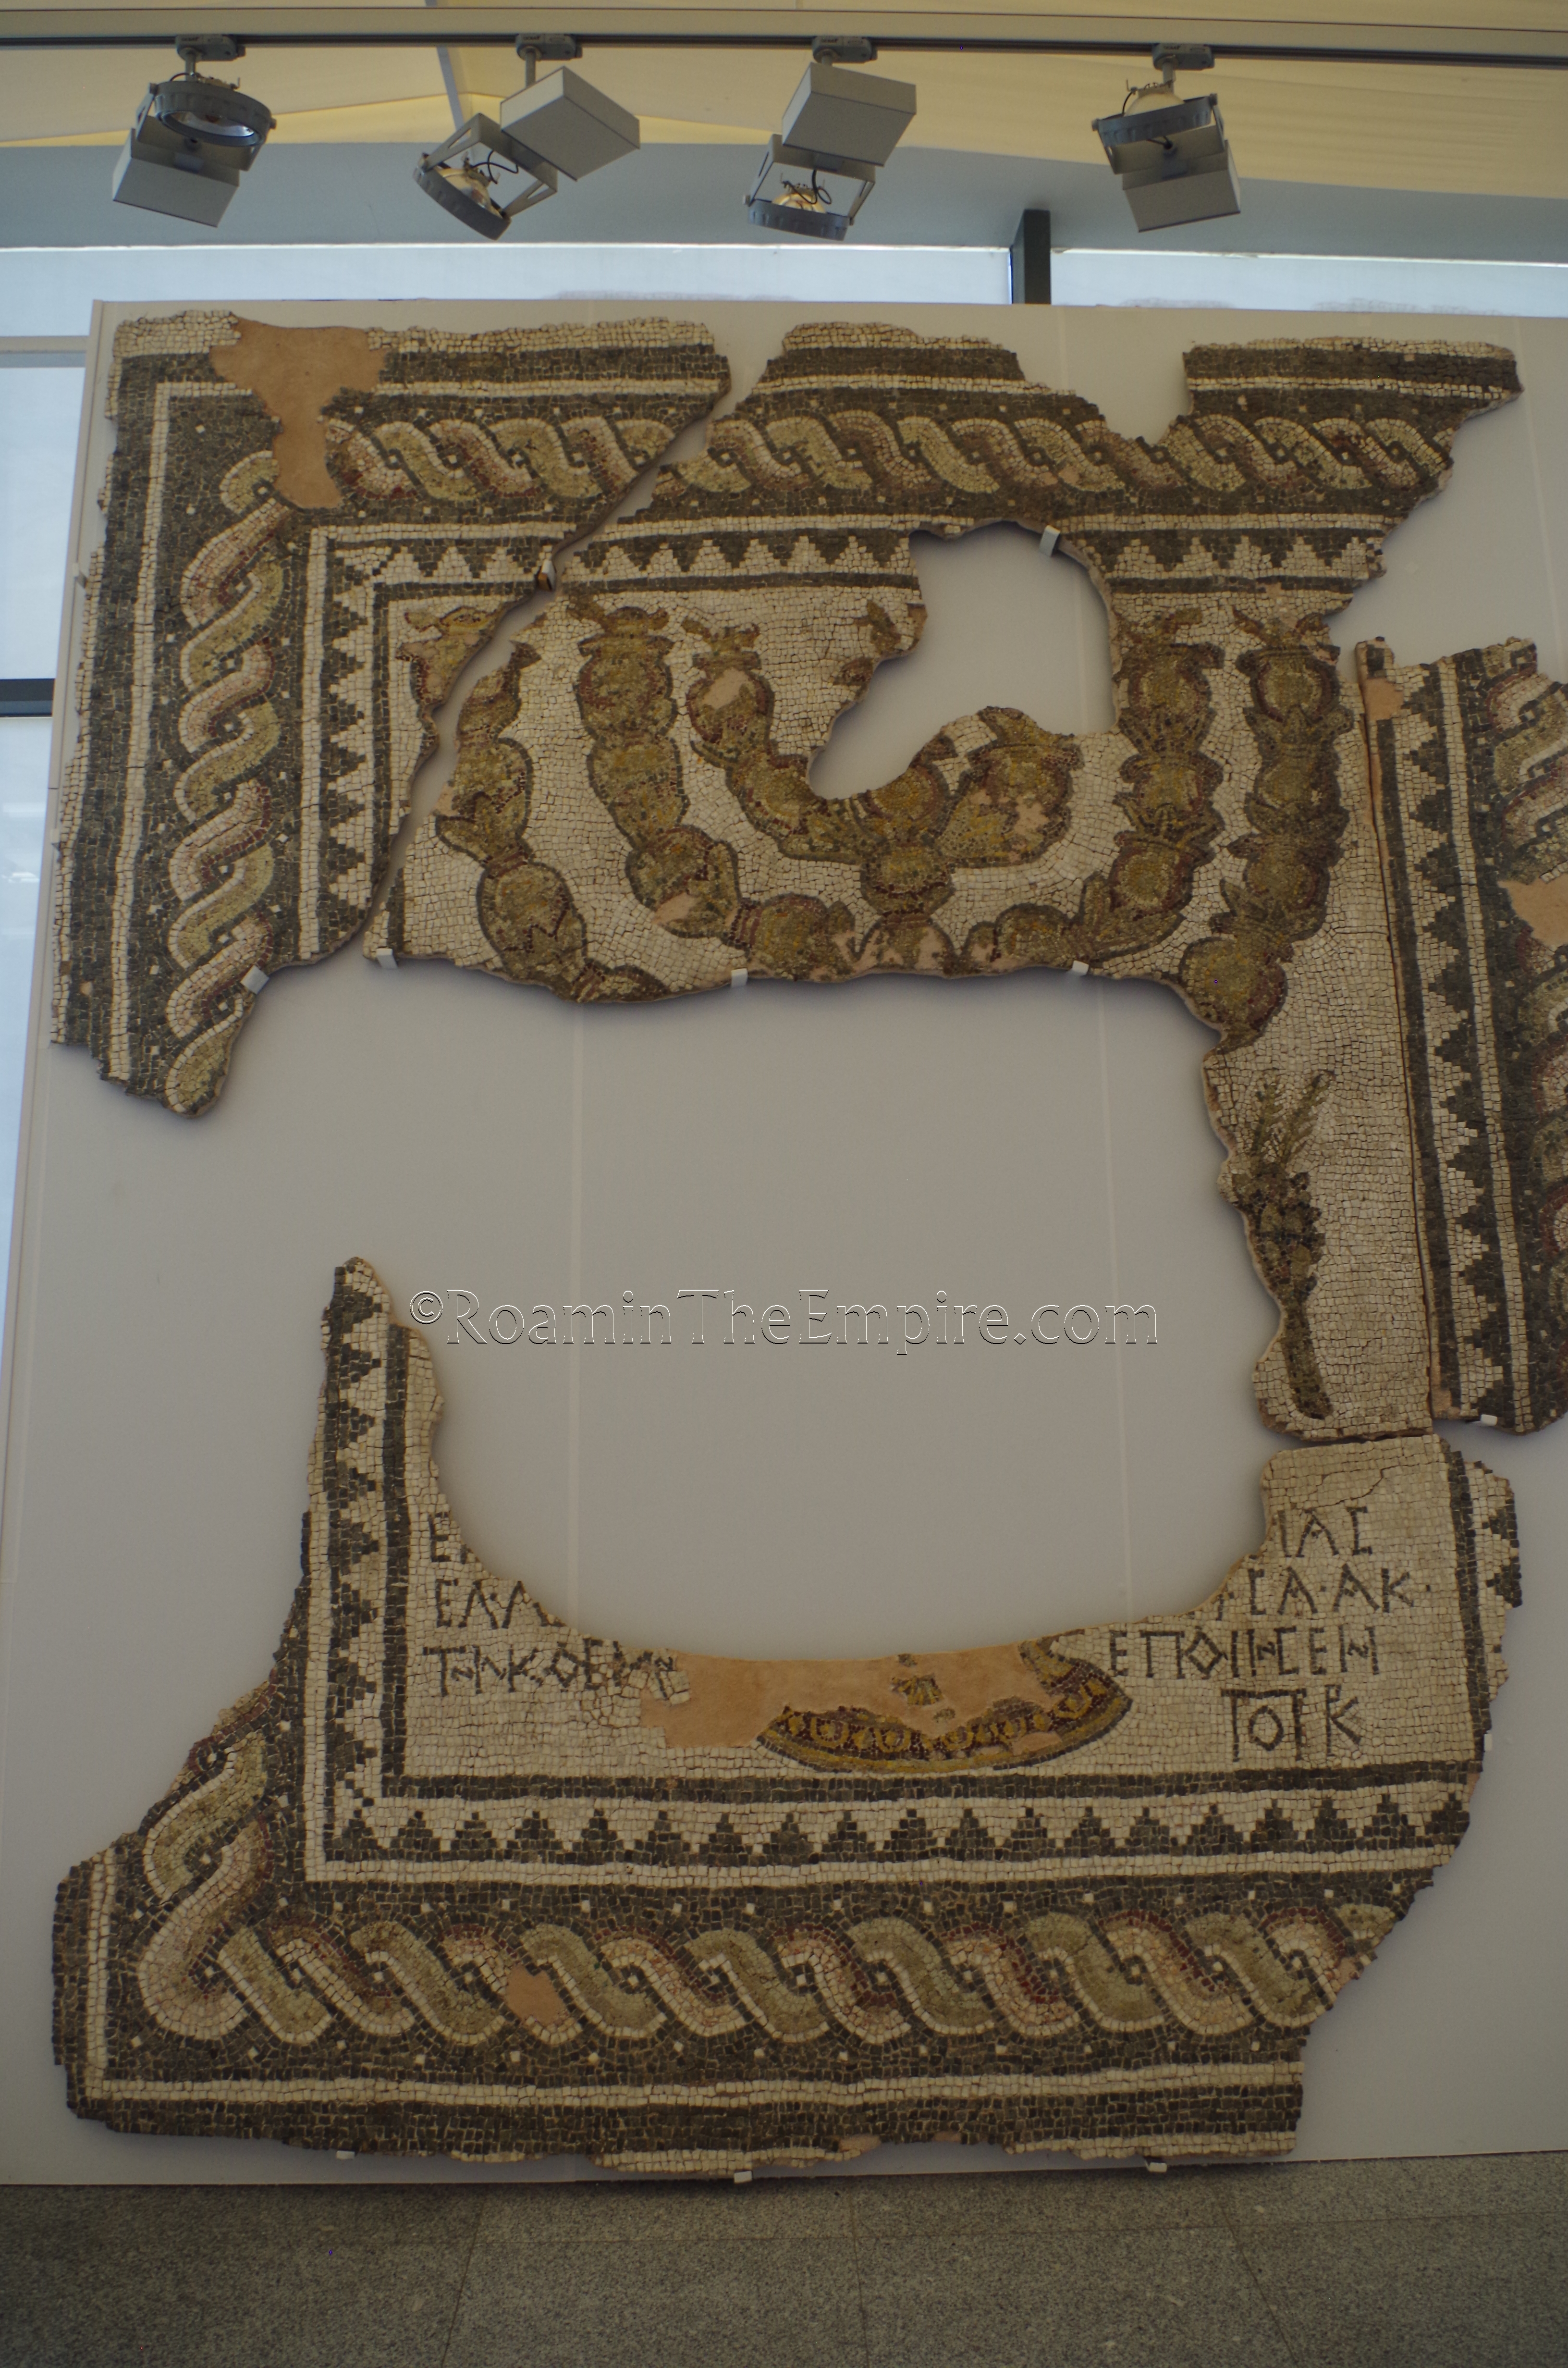 Mosaic of menorah and prayers dated to the mid-3rd century CE from an ancient synagogue in Philippopolis, believed to be the only synagogue in Bulgaria in antiquity. Regional Archaeological Museum.